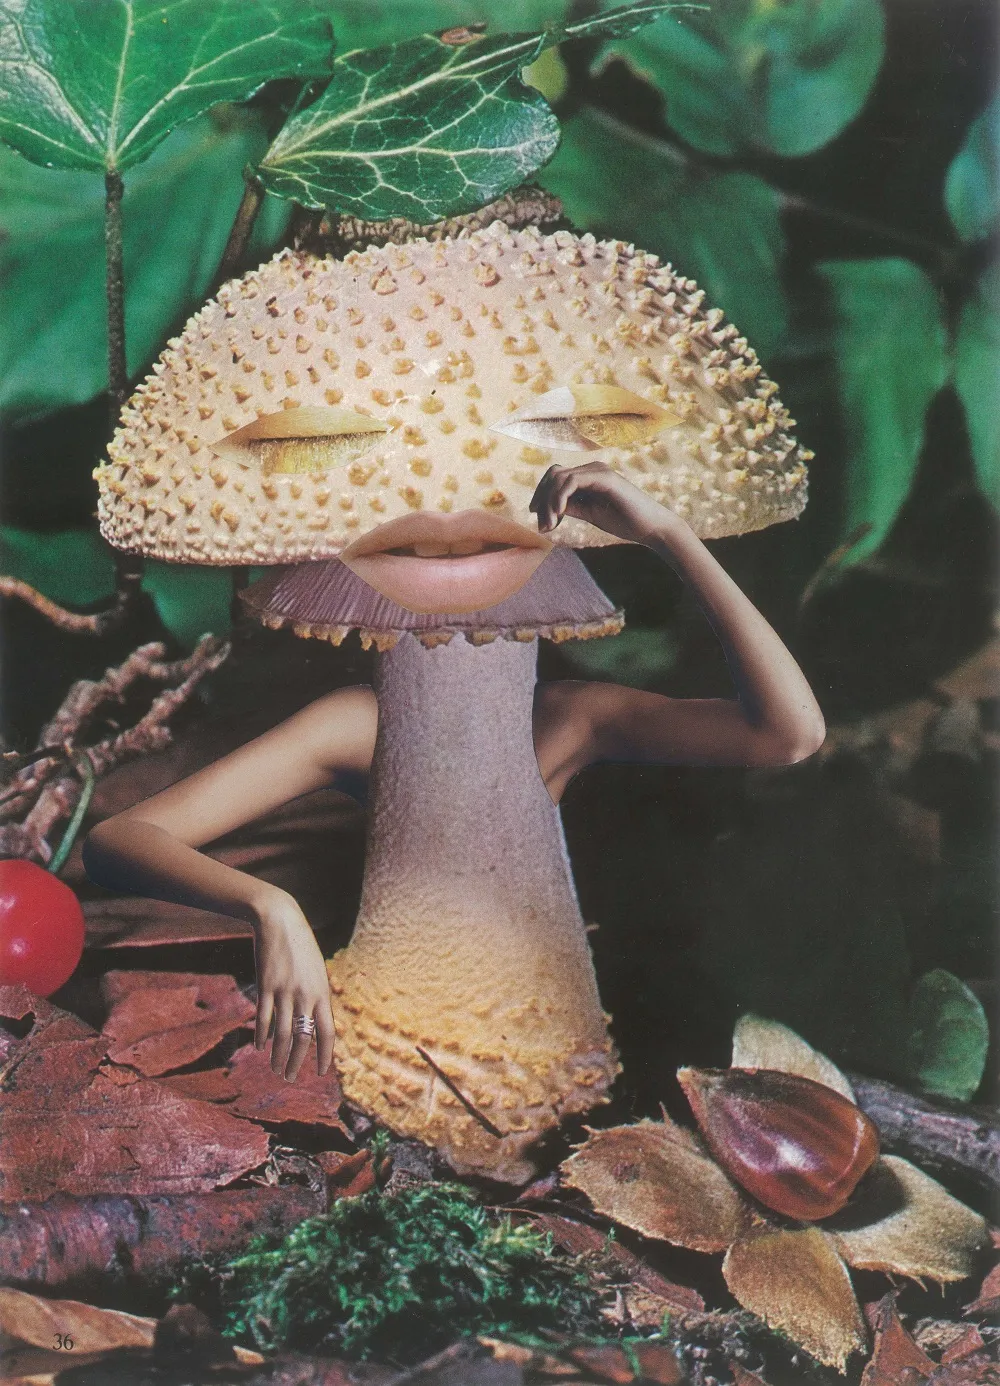 Get a Taste for Mushroom Art at This New, Fungus-Forward Exhibition